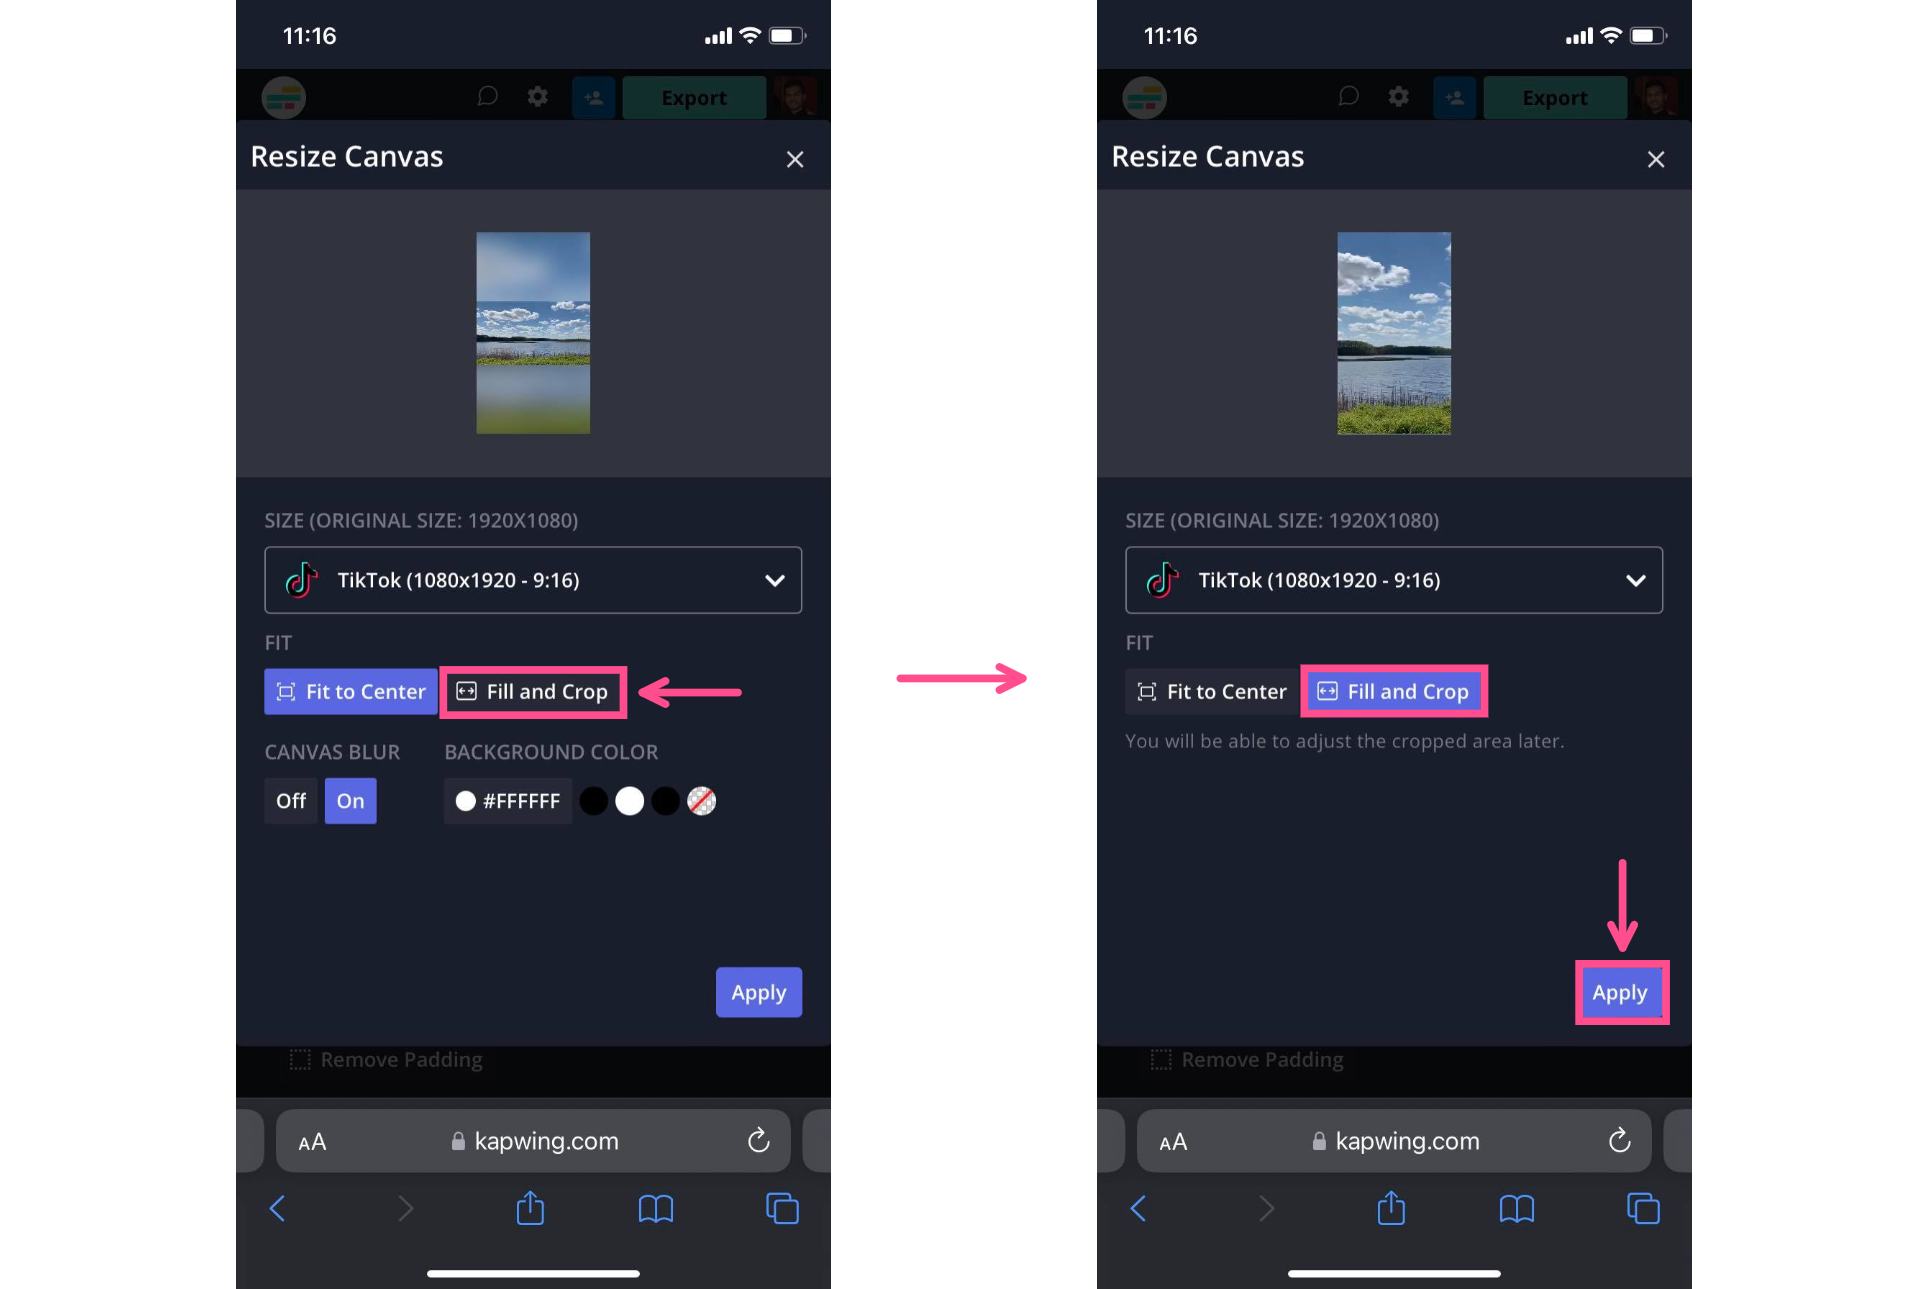 Screenshots showing how to fill and crop a vertical video in Kapwing